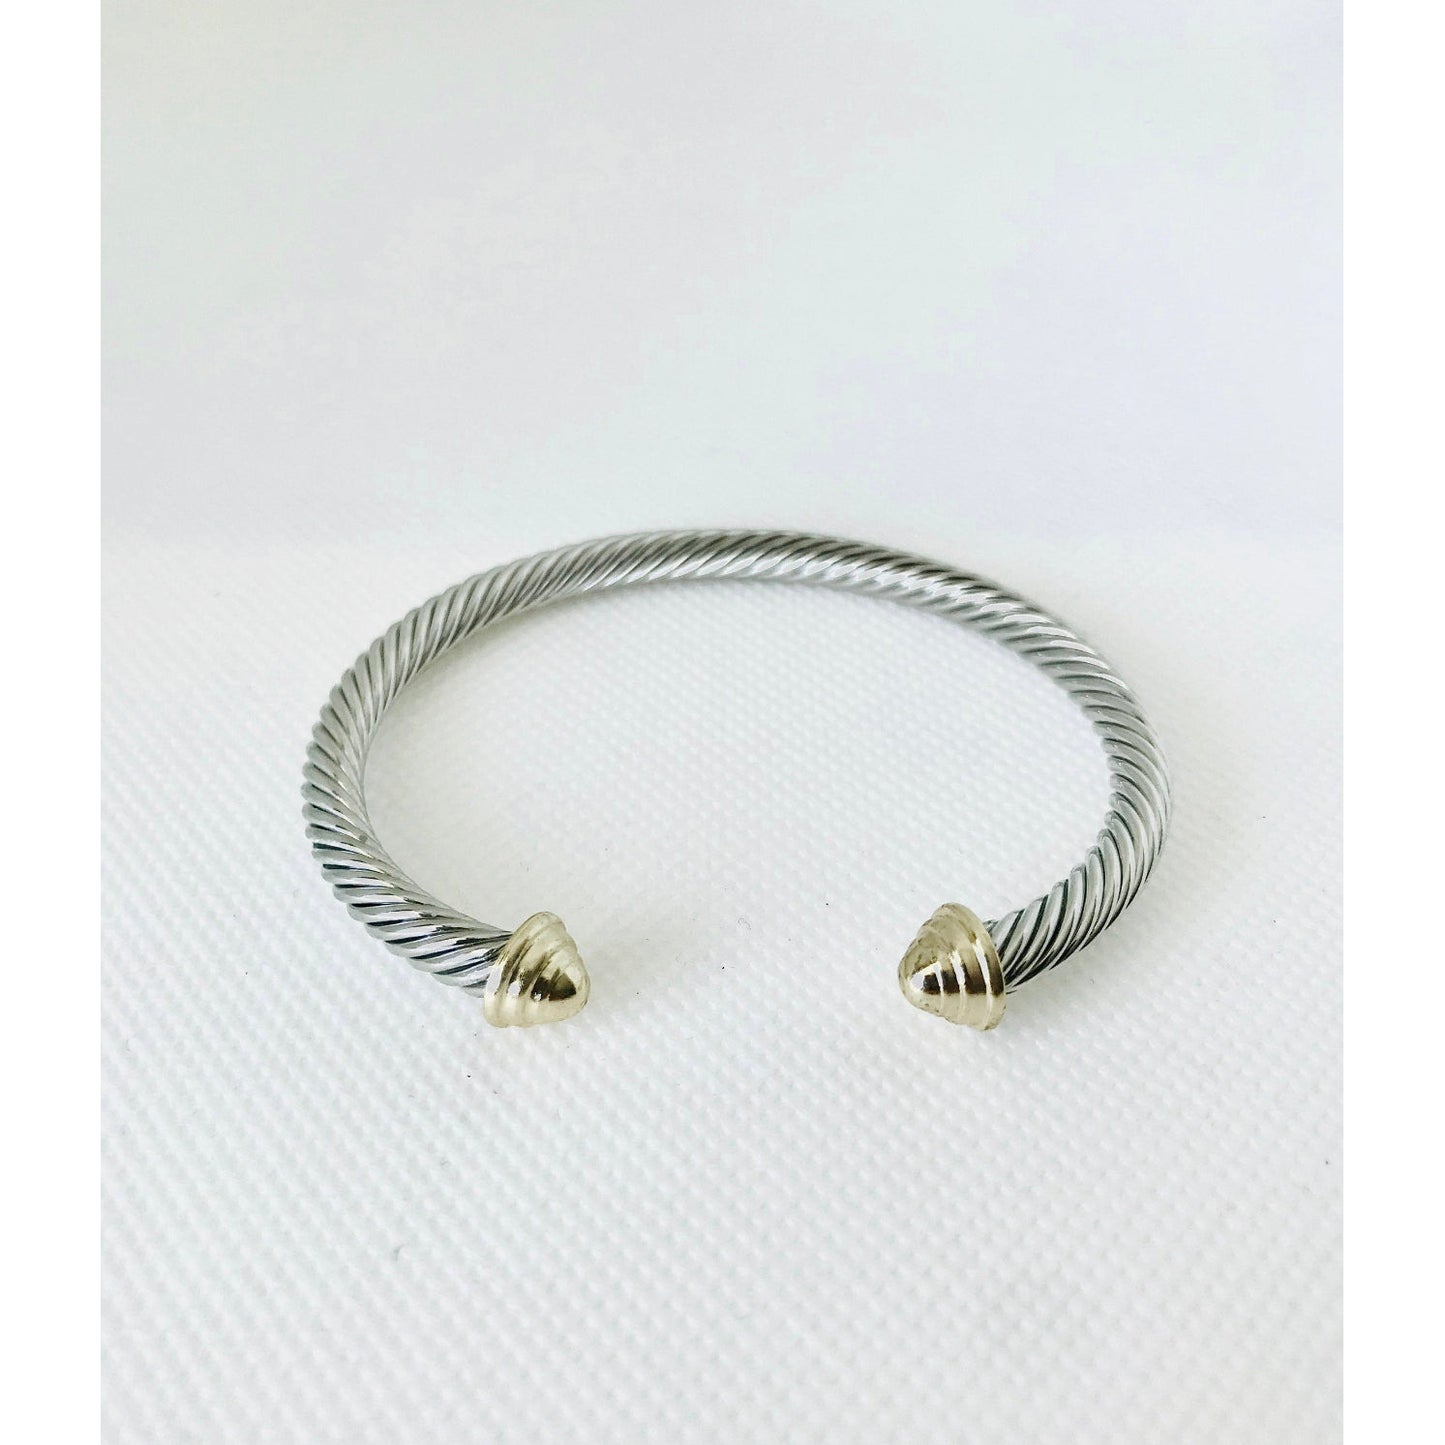 Cable Cuff Bracelet Stack